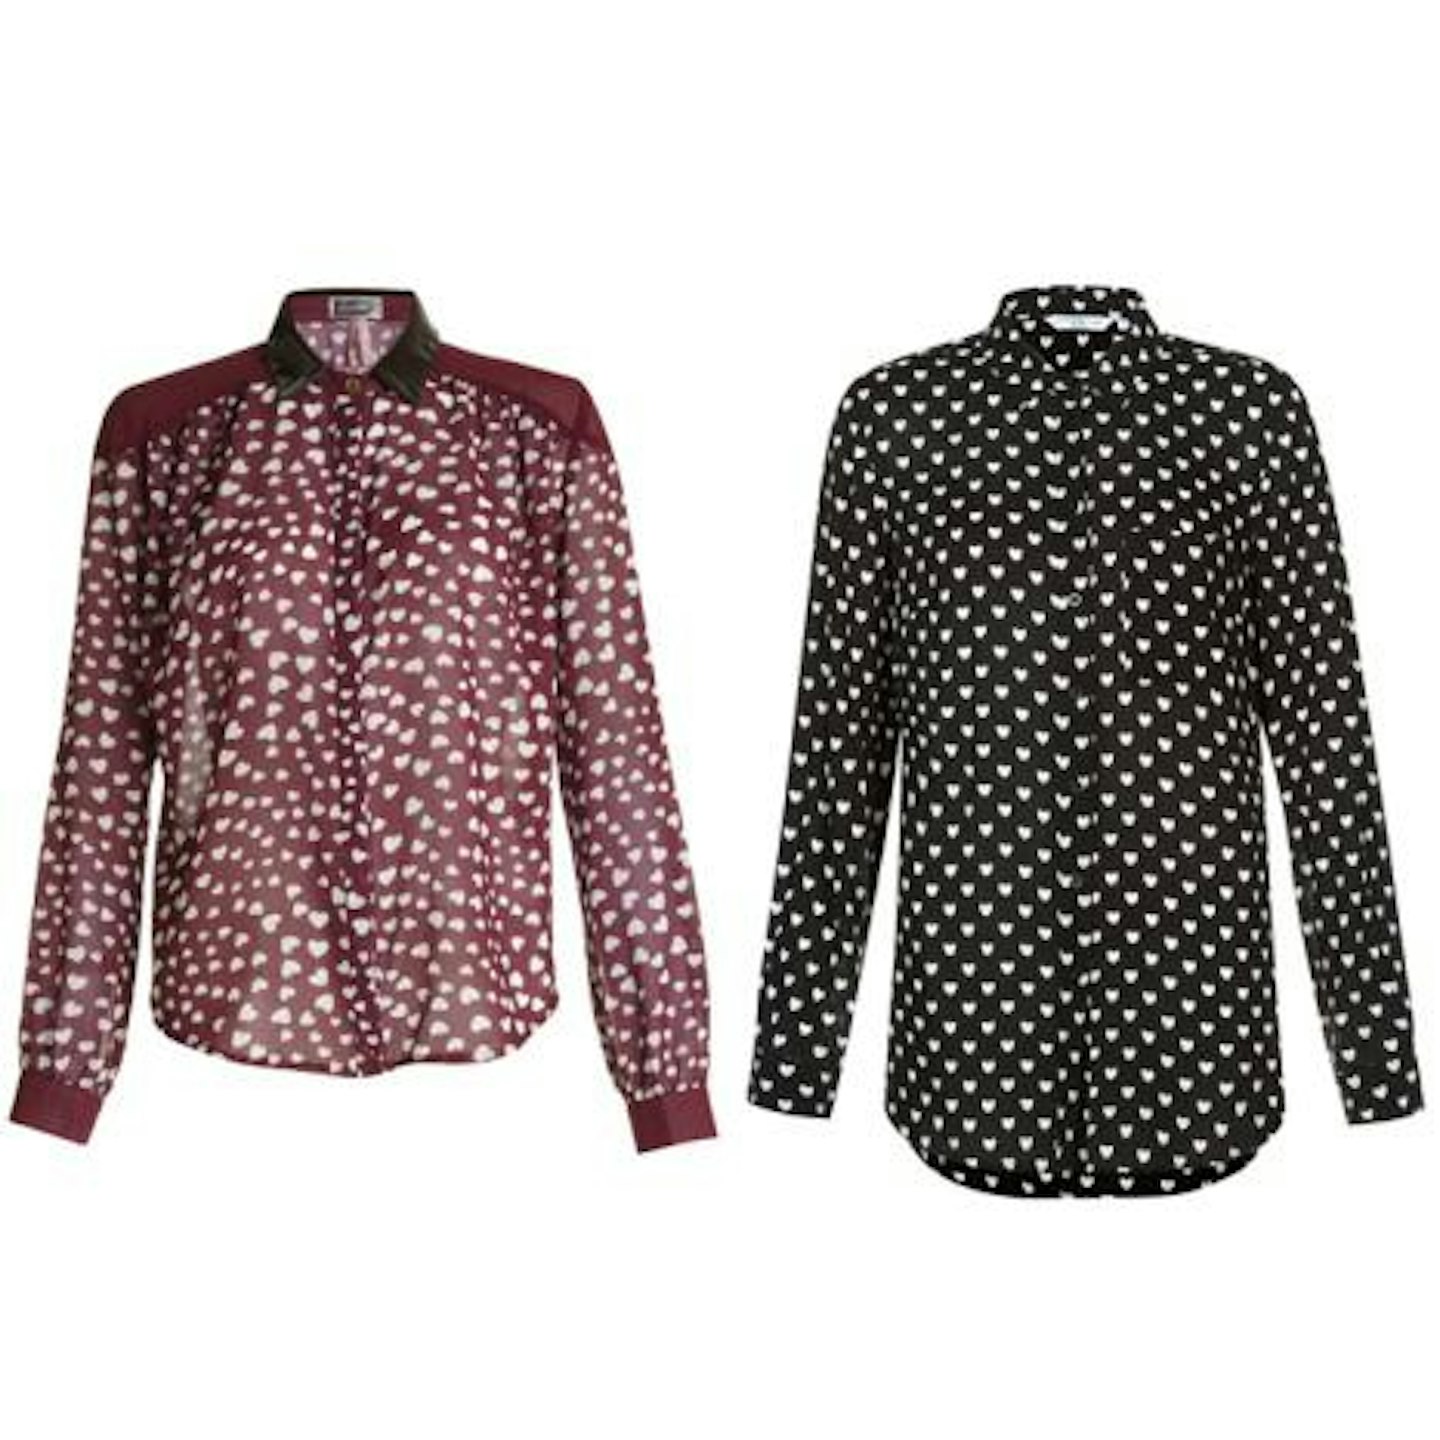 From left to right: Lipsy and New Look shirts